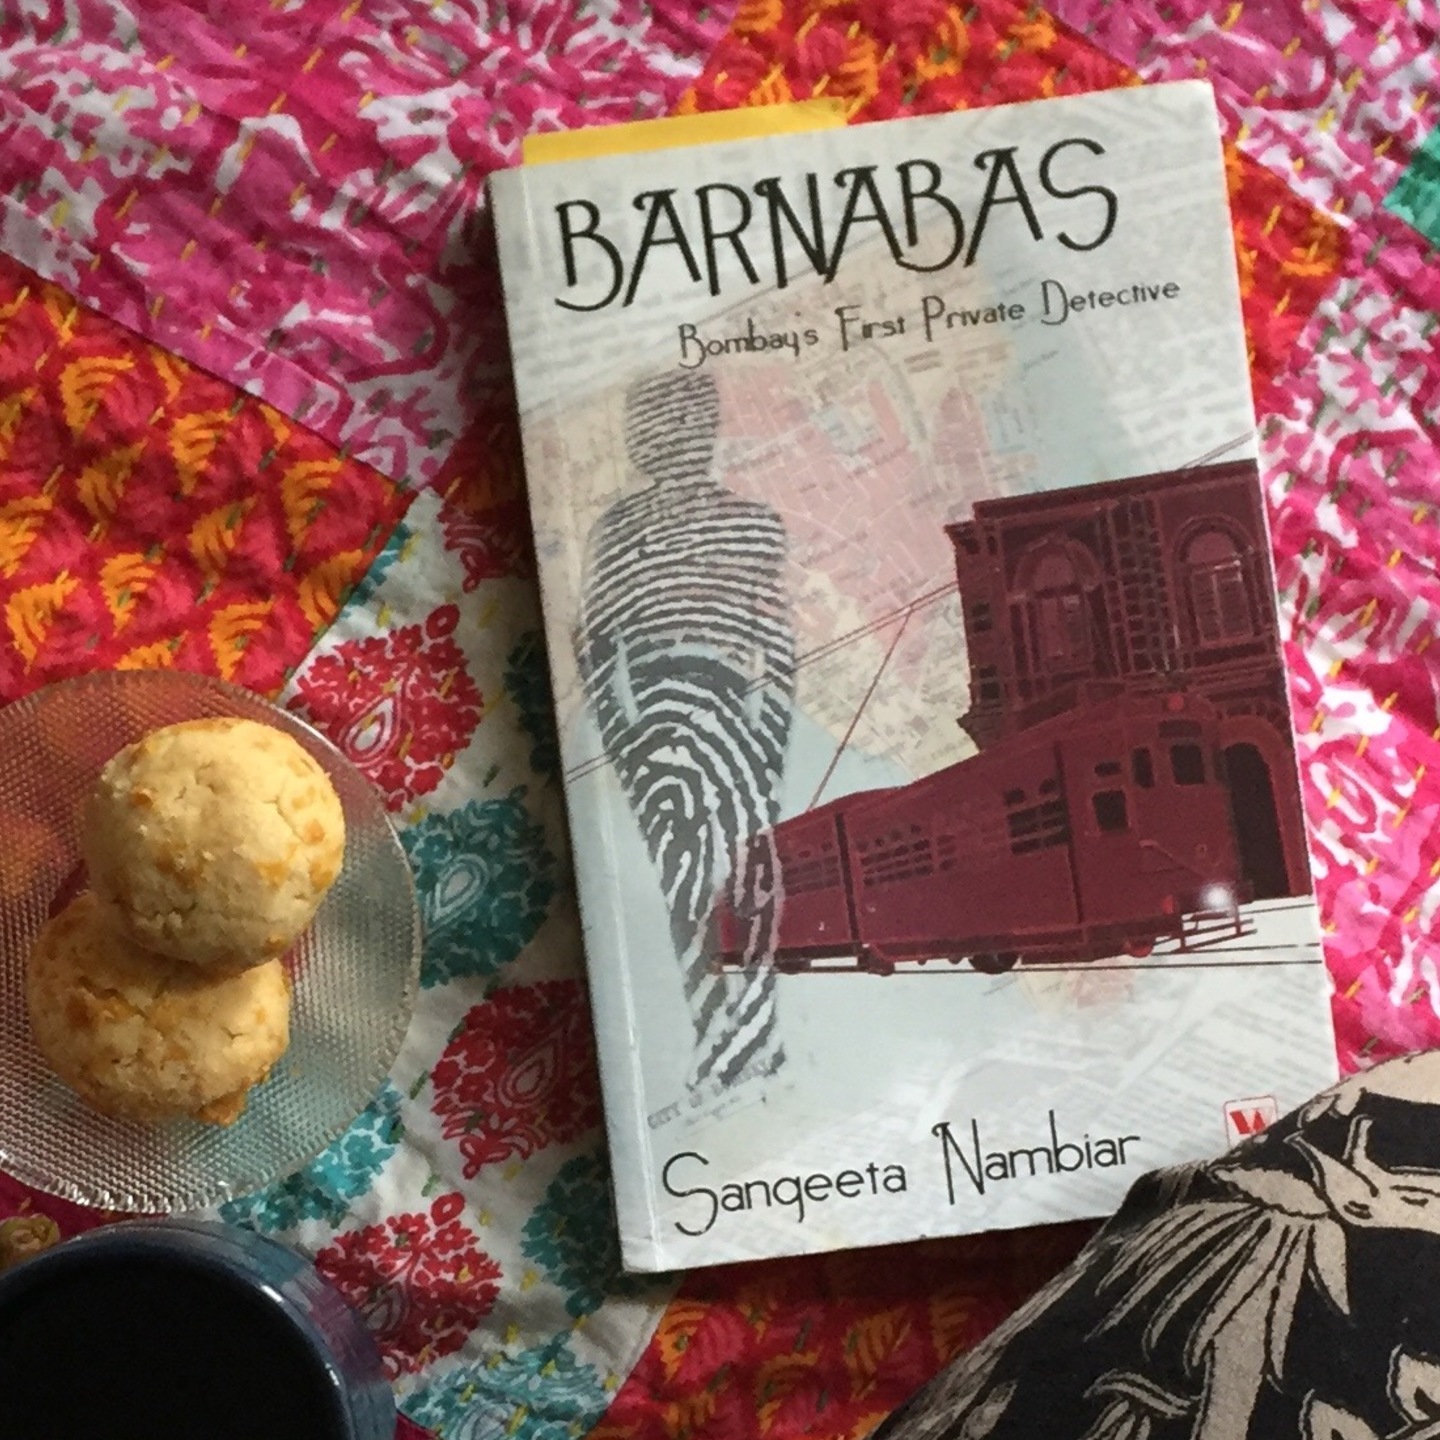 Barnabas: Bombay's First Private Detective by Sangeeta Nambiar